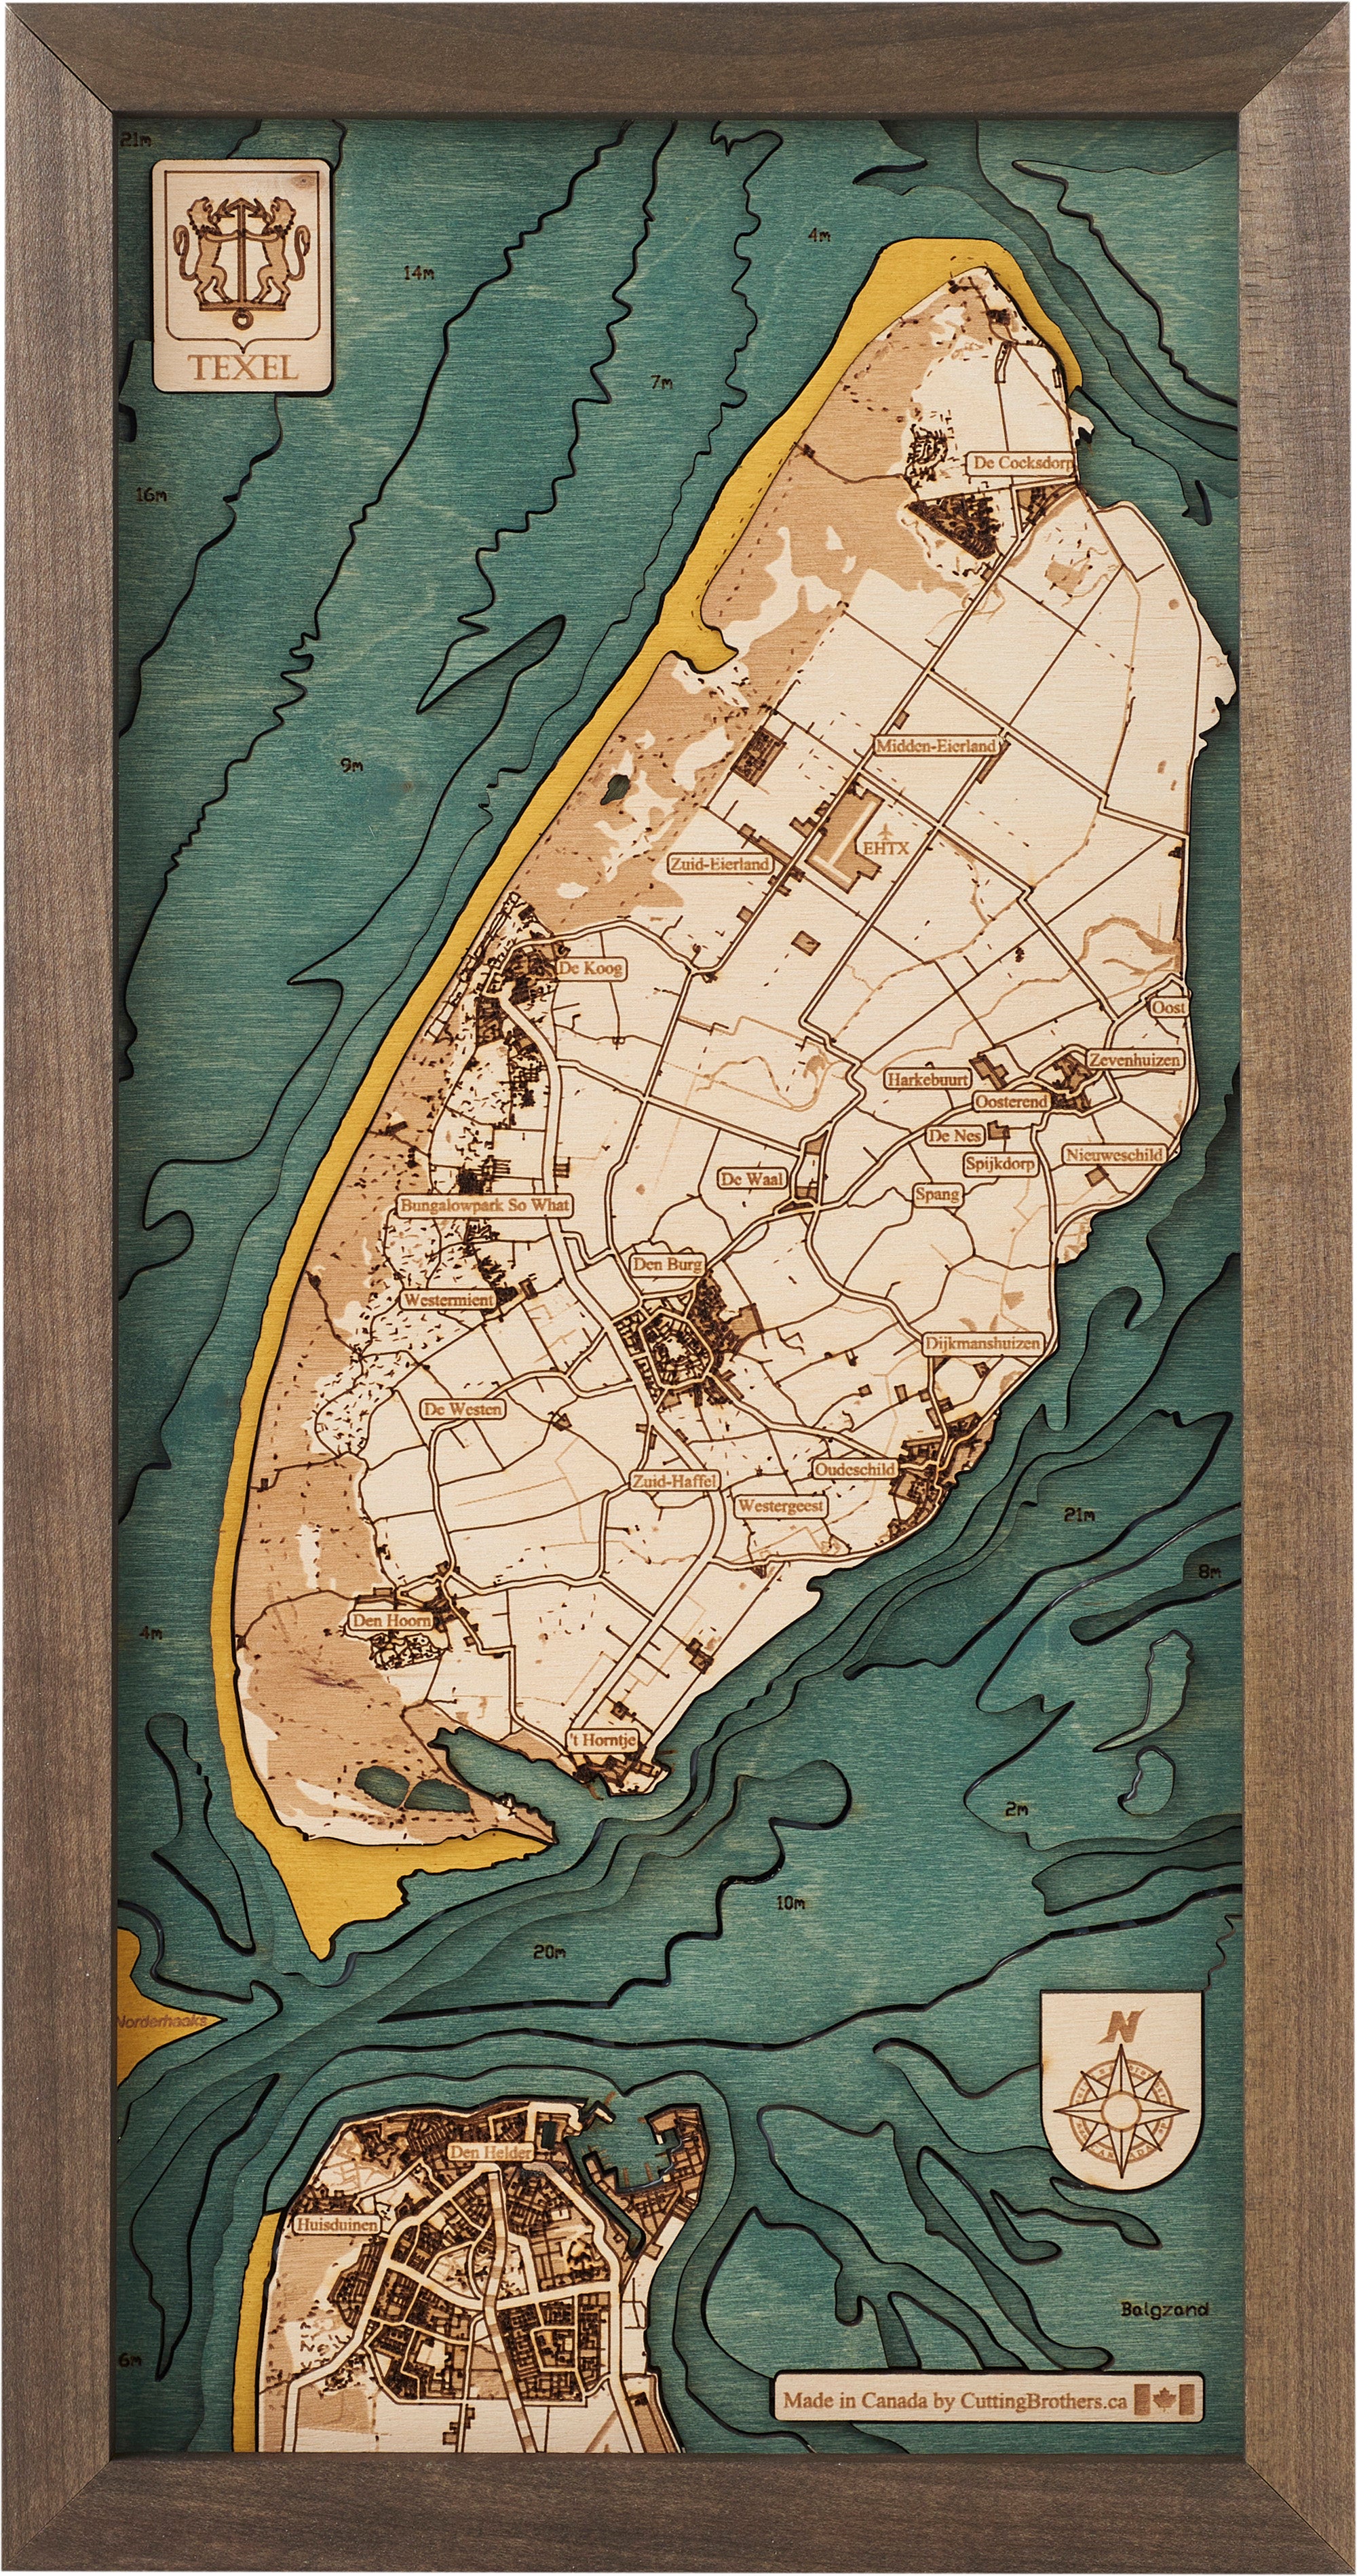 TEXEL 3D wooden wall map - version S 